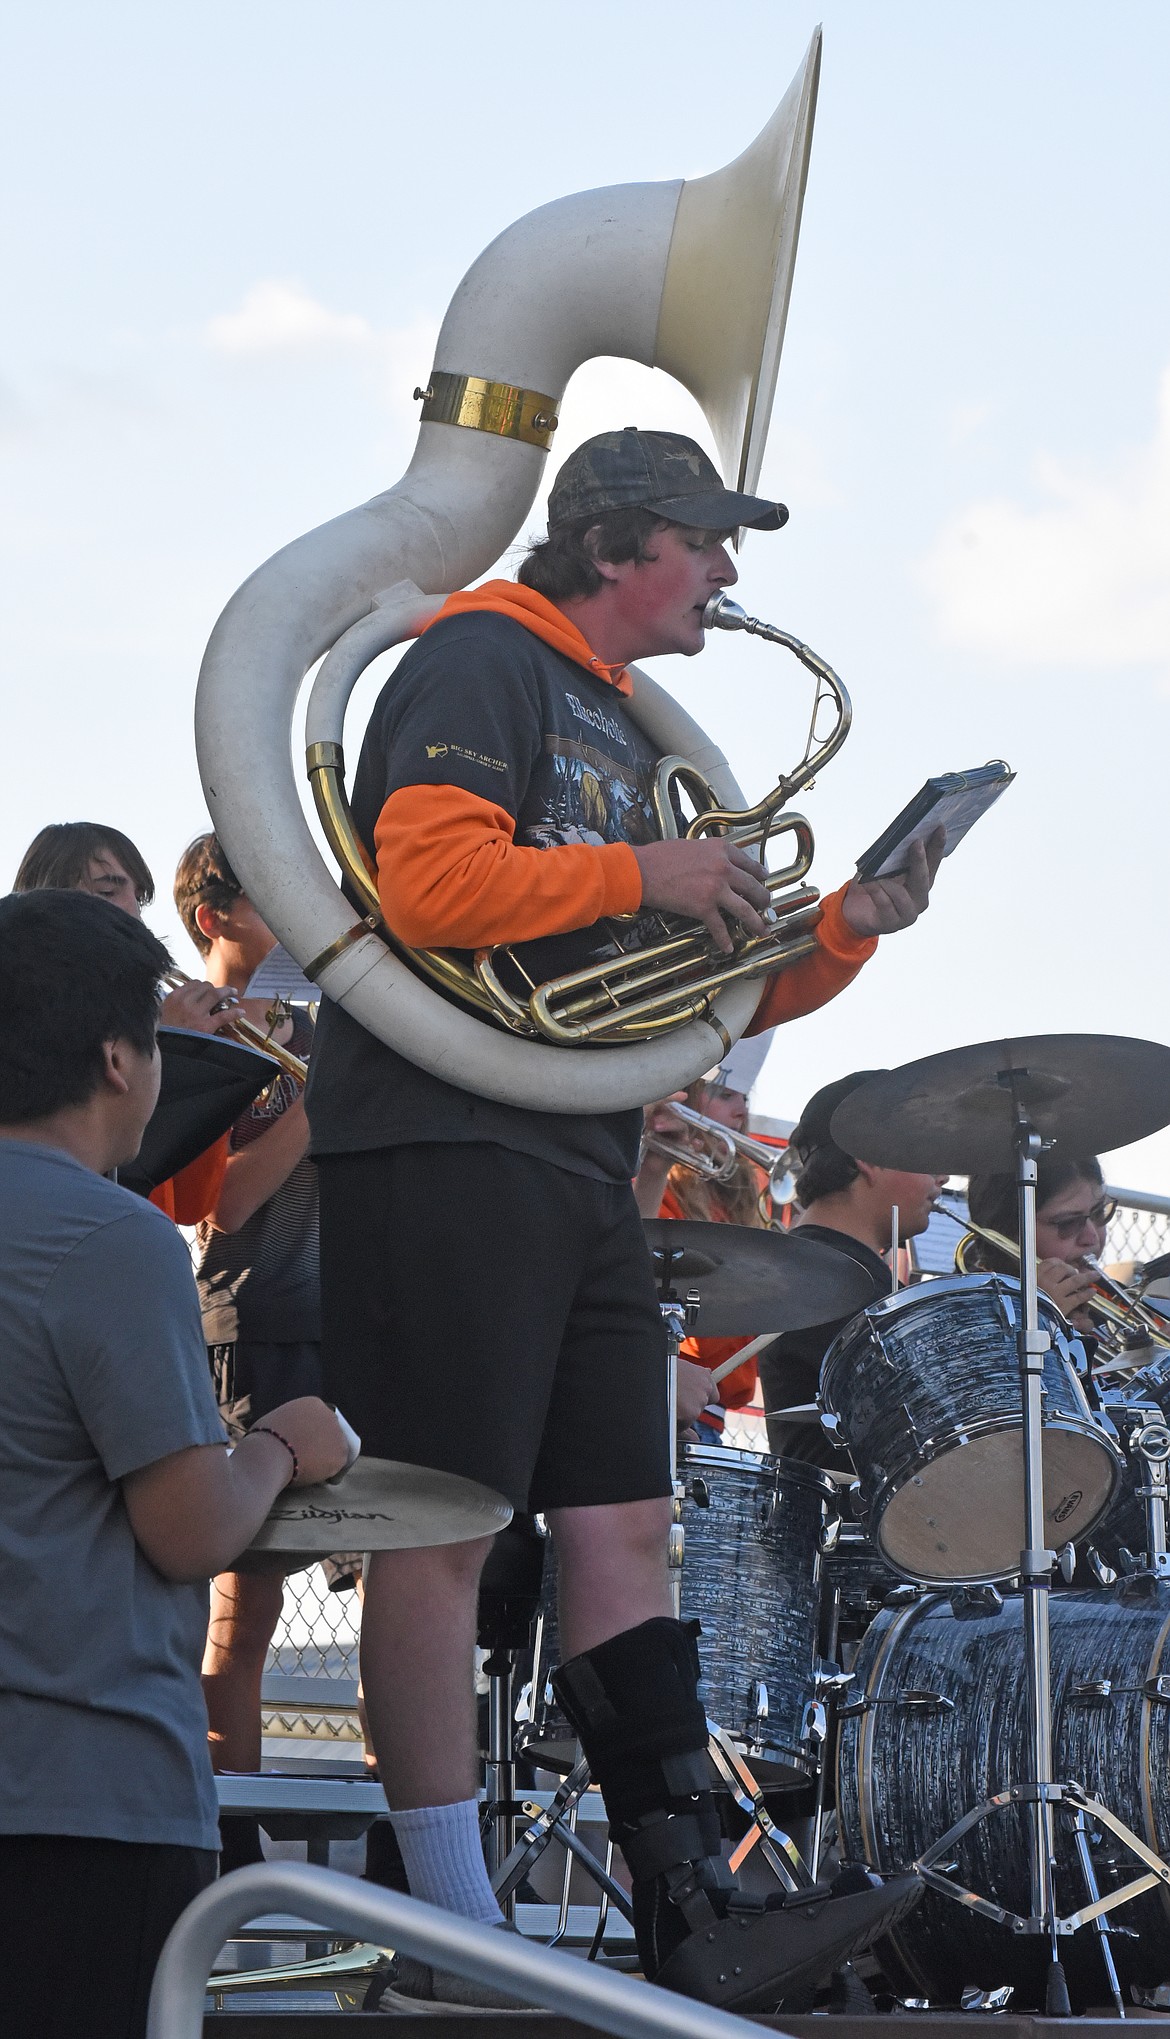 Lineman Hayden Hakes demonstrates another talent as he plays tuba in the band. He was unable to play football on this evening while stuck in a walking cast.